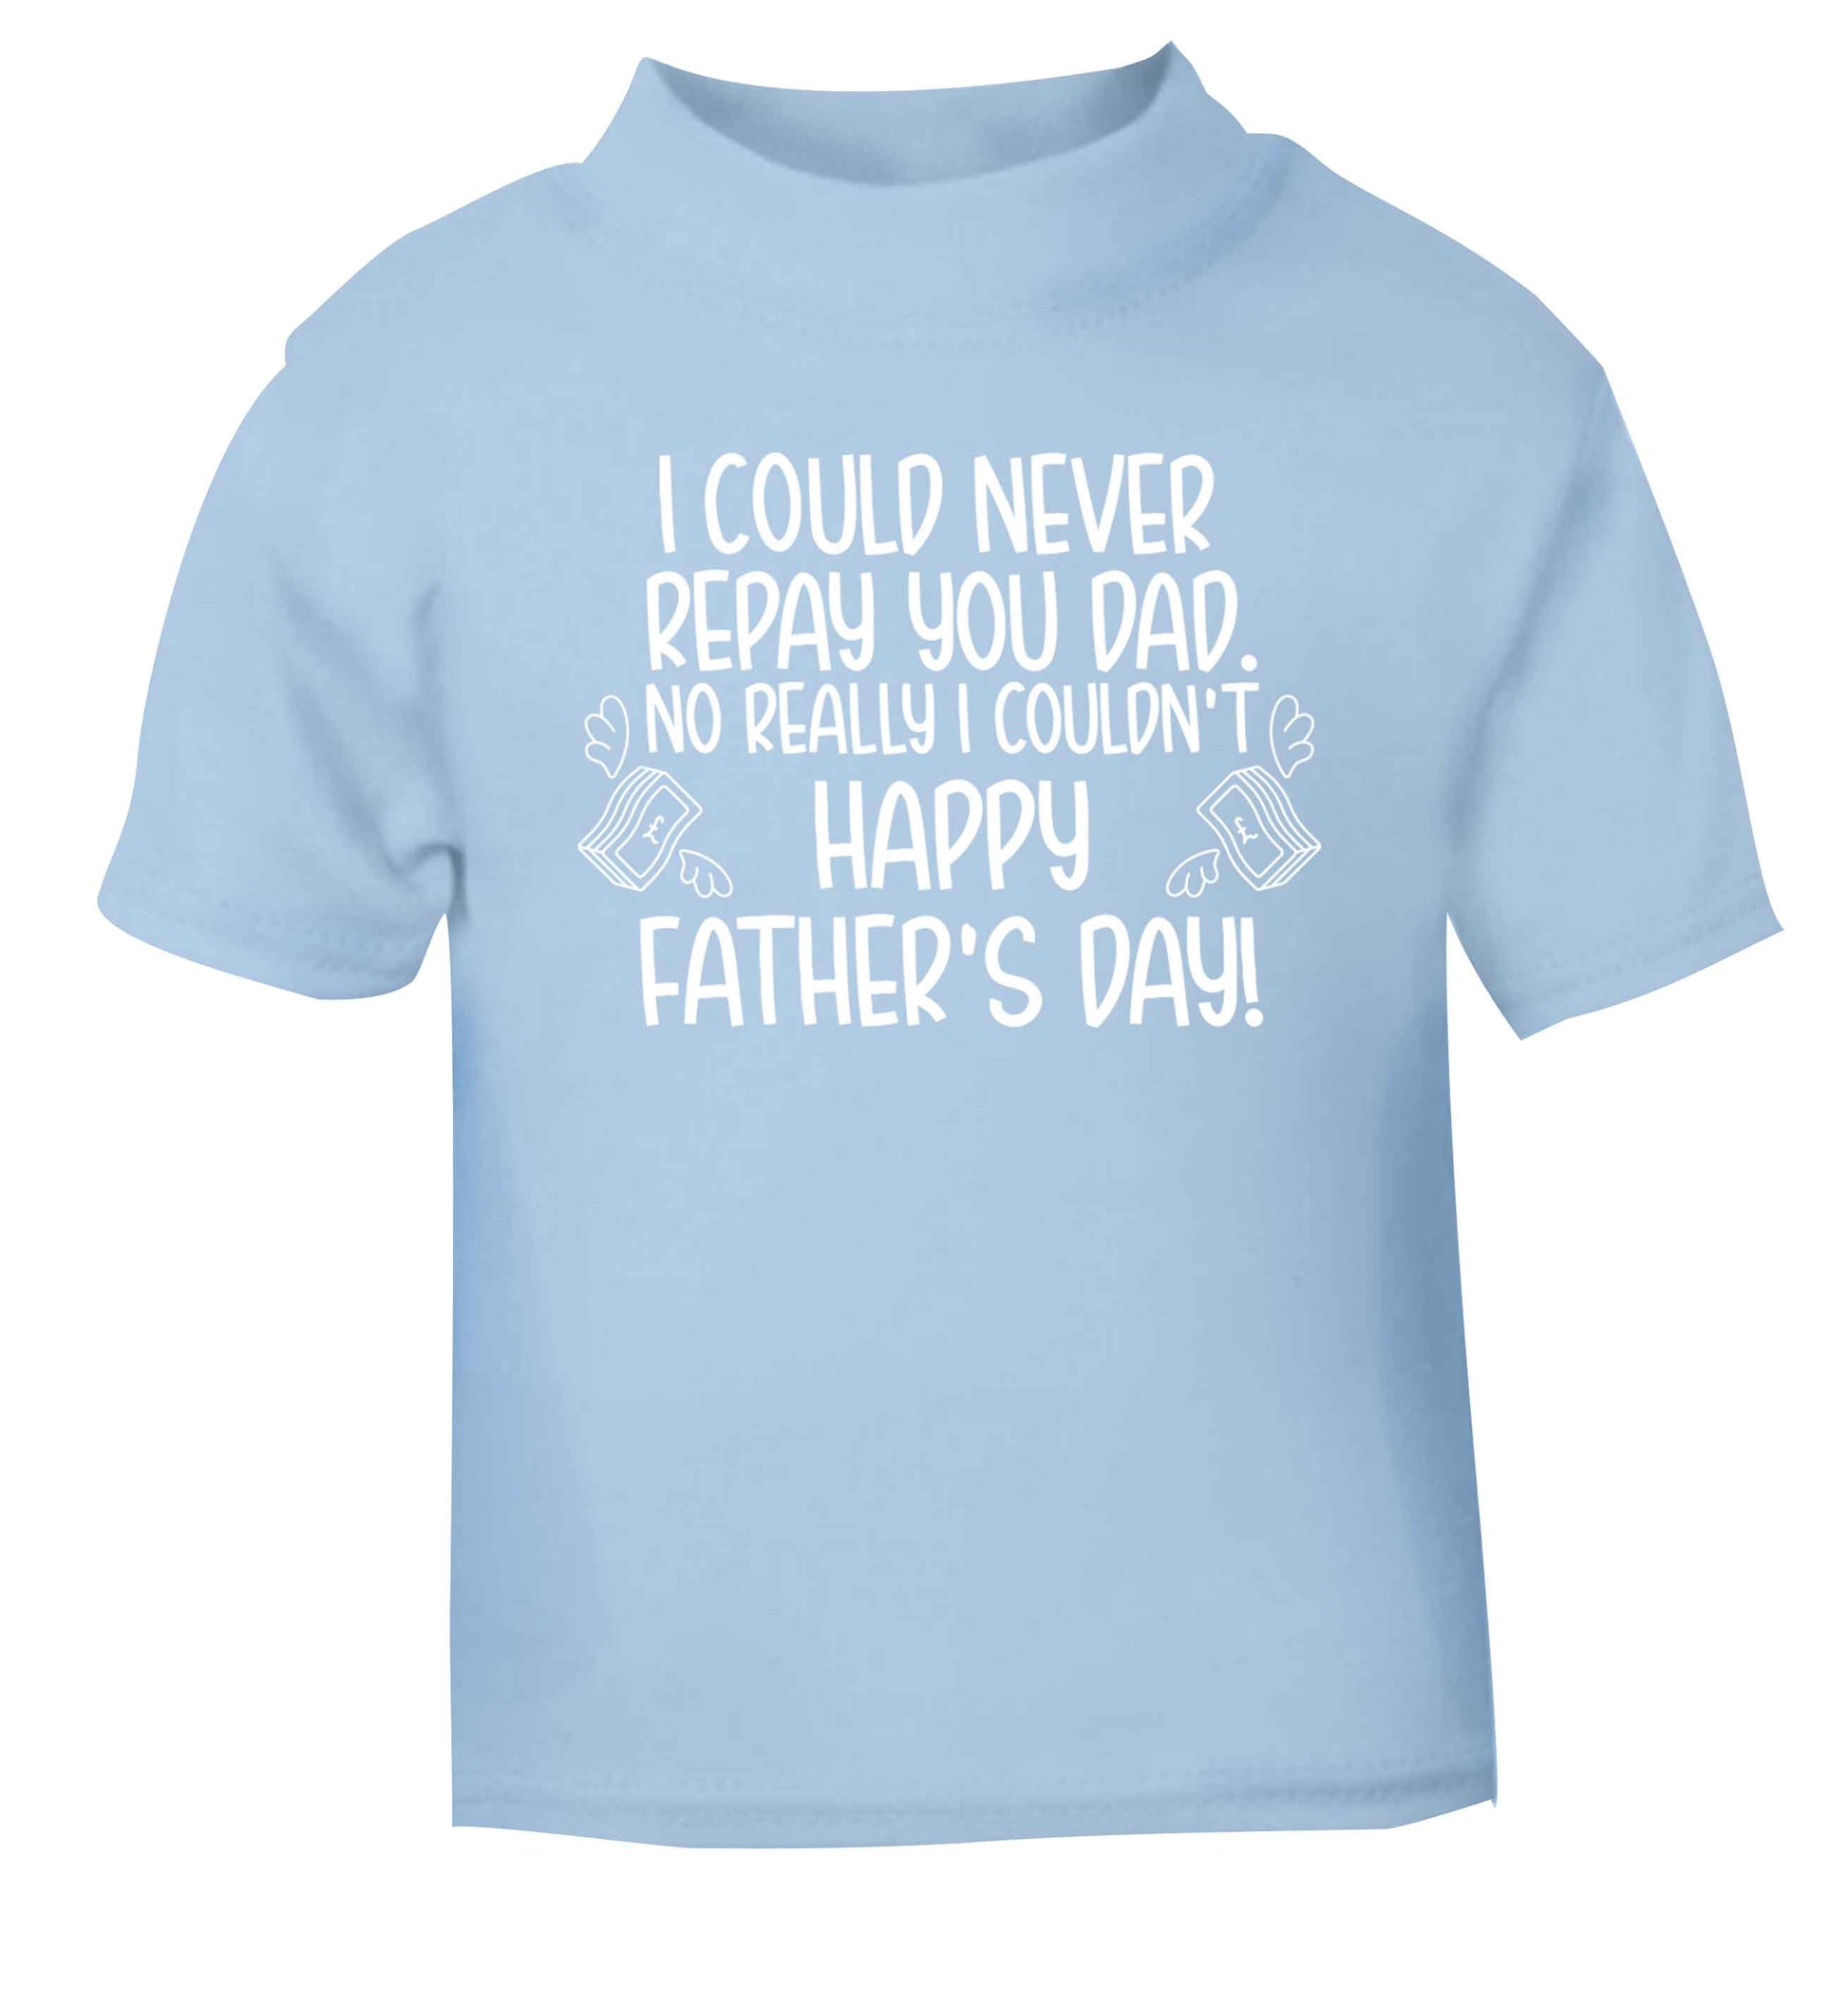 I could never repay you dad. No I really couldn't happy Father's day! light blue baby toddler Tshirt 2 Years